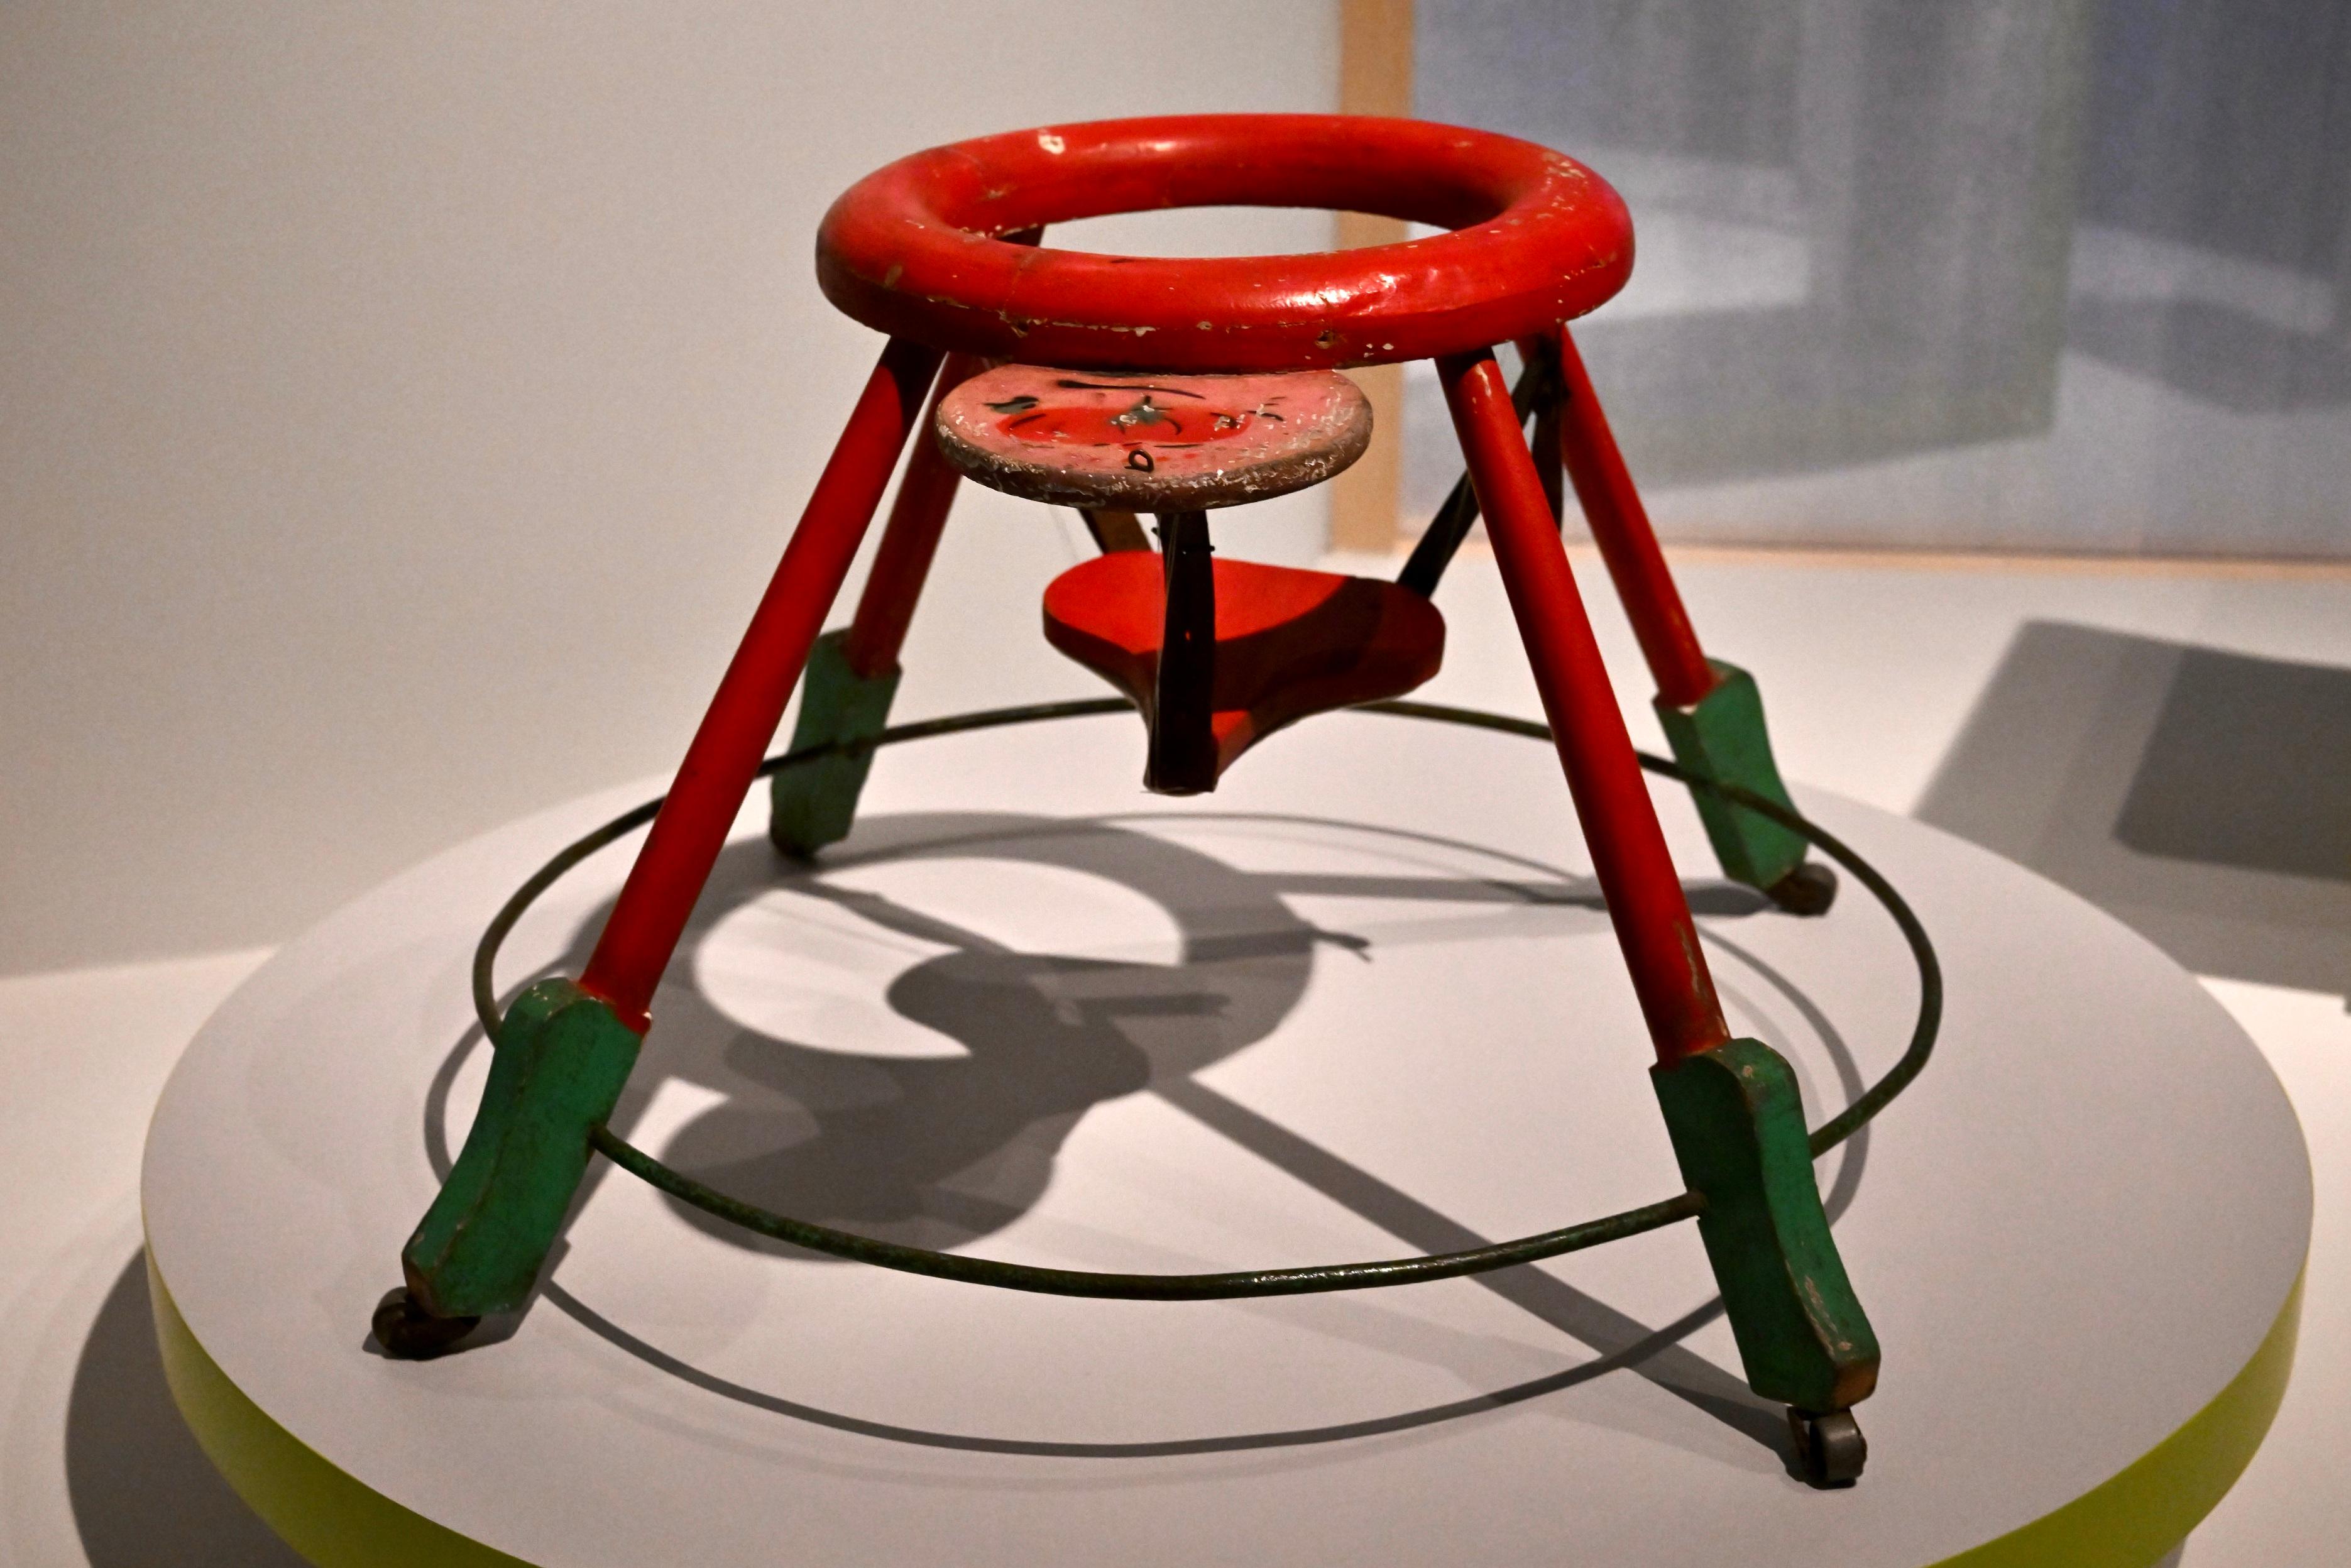 The opening ceremony for the exhibition "Po Leung Kuk 145th Anniversary: Building Charity with Benevolence" was held today (October 17) at the Hong Kong Heritage Museum. Nursery classes were once provided to women under the care of Po Leung Kuk. Photo shows a baby walker from the 1950s to 1960s.
